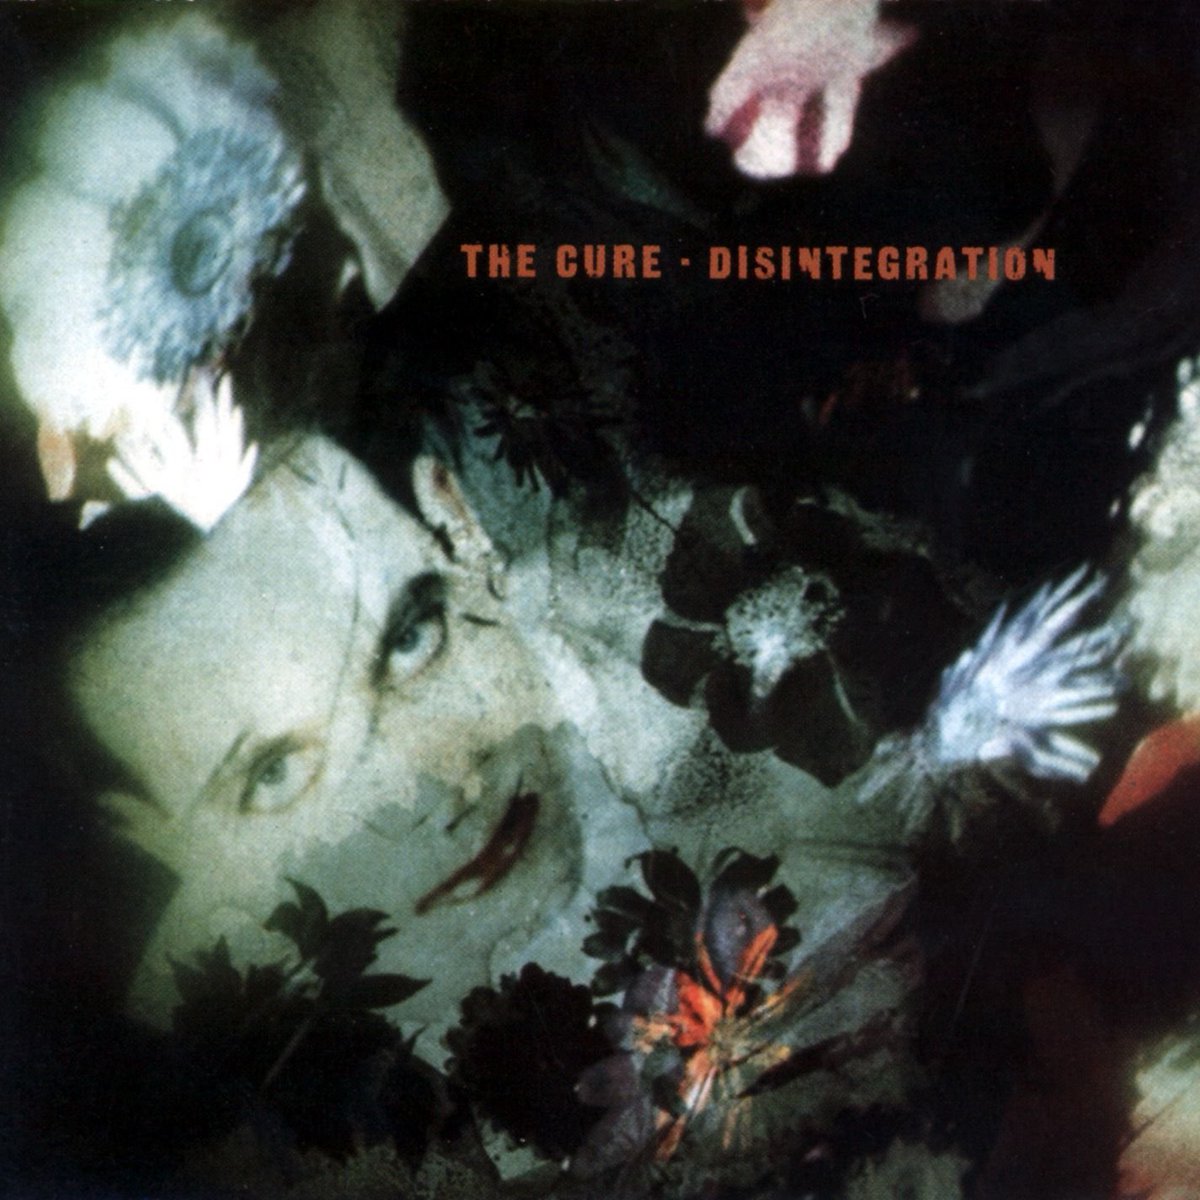 Today marks the 29th anniversary of The Cure's 'Disintegration'. Tune in tonight at 11 for 'Classic Rewind' to hear the whole album.